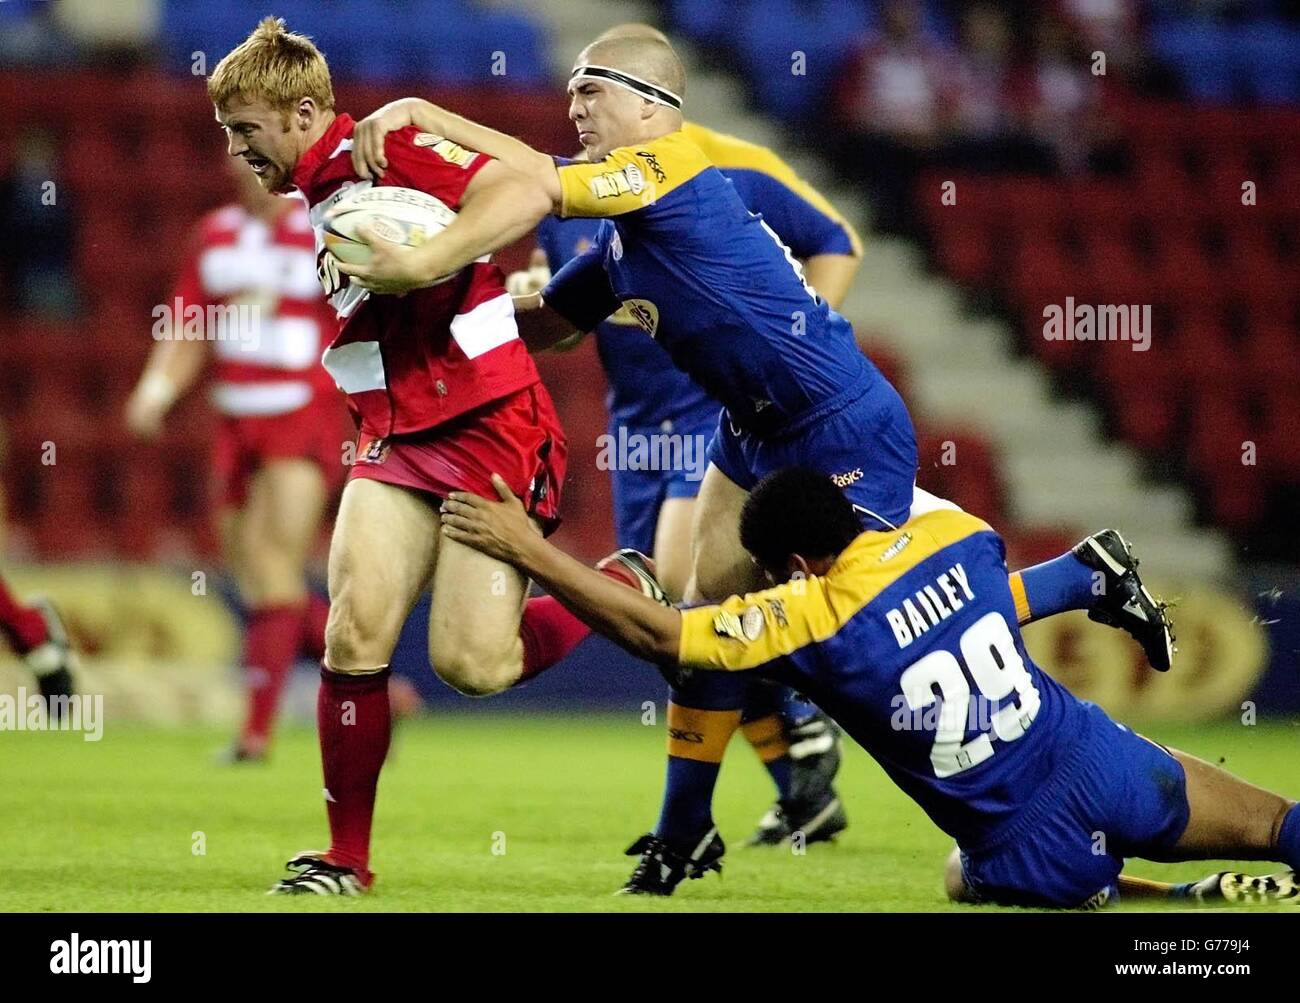 Wigan's David Hodgson is pulled back by Leeds's Matt Diskin and Ryan Bailey, during their Tetley Bitter Super League game at the JJB Stadium, Wigan. Stock Photo